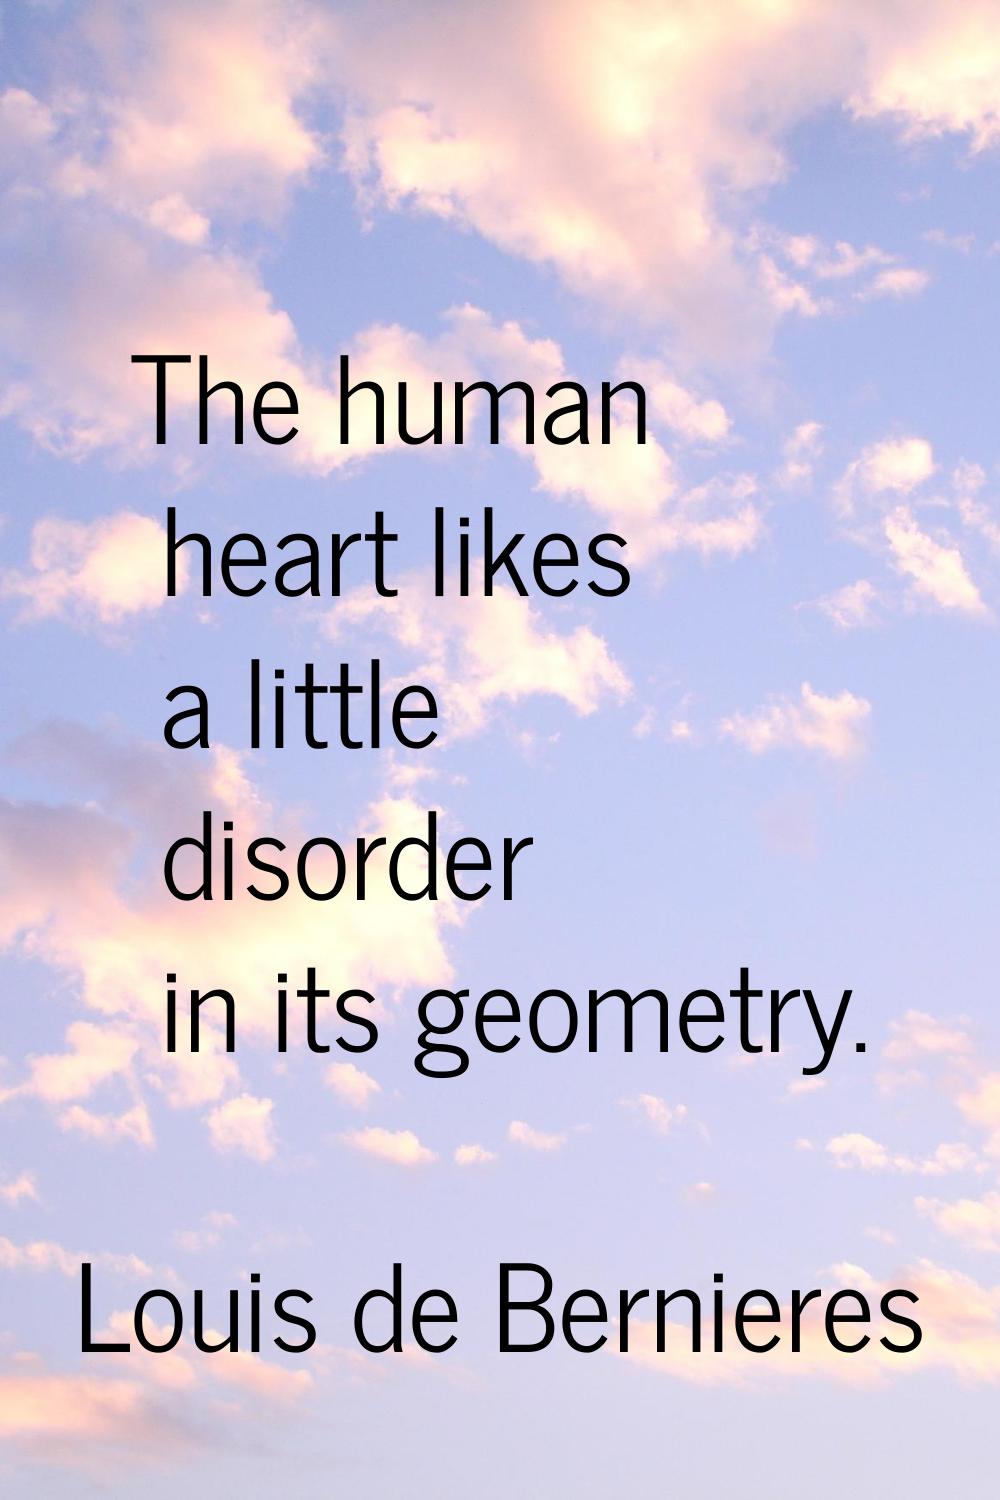 The human heart likes a little disorder in its geometry.